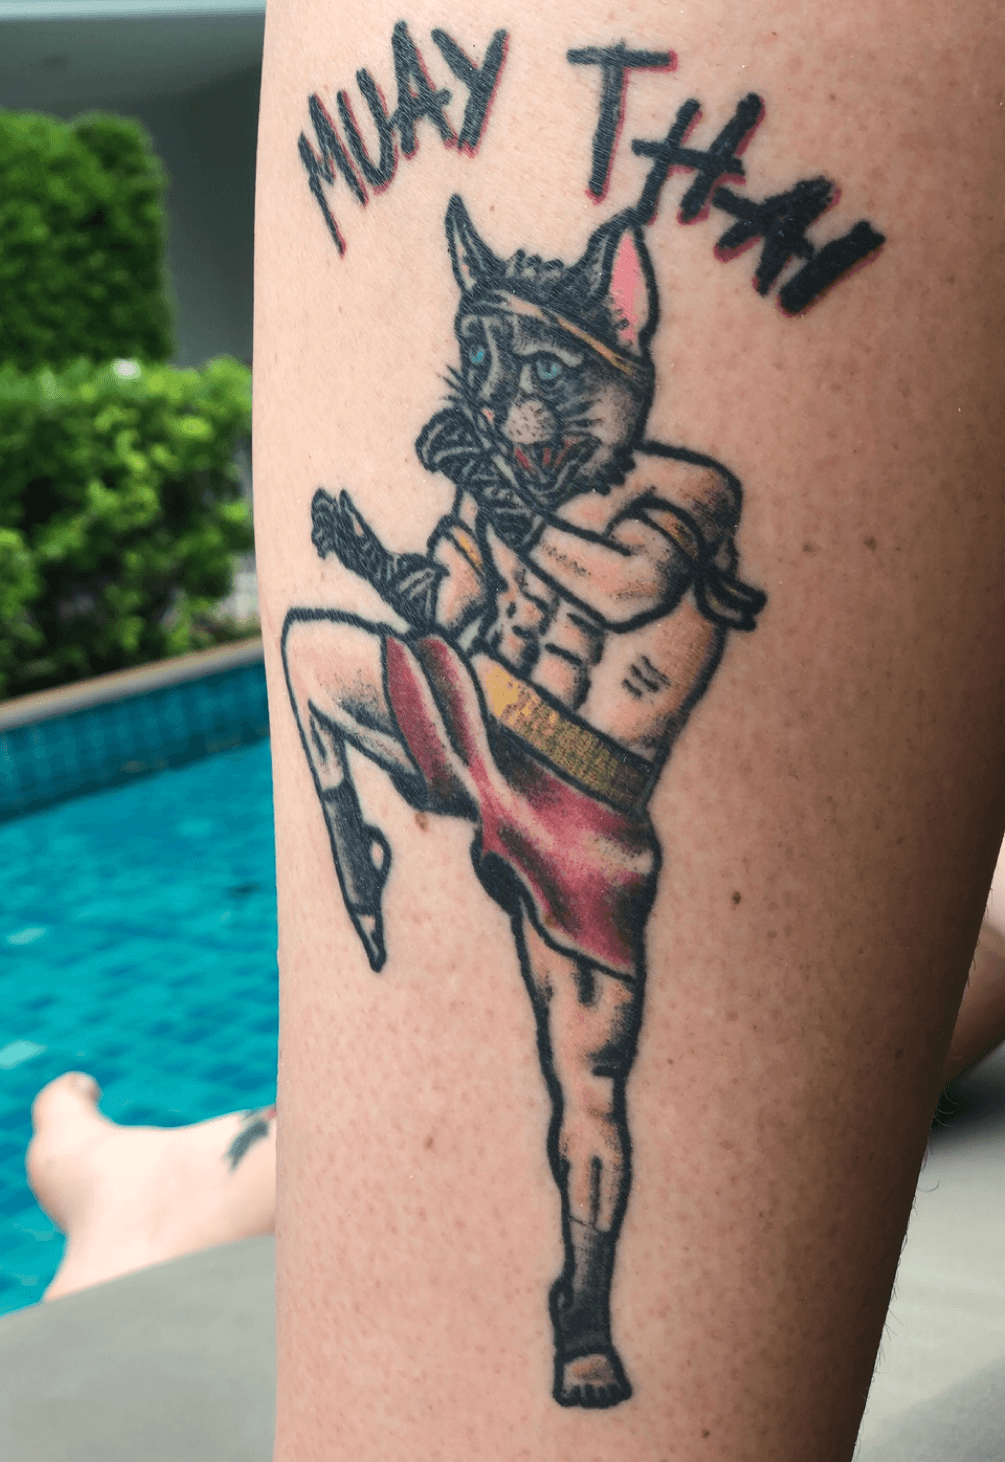 Muay Thai Tattoo symbols and meanings